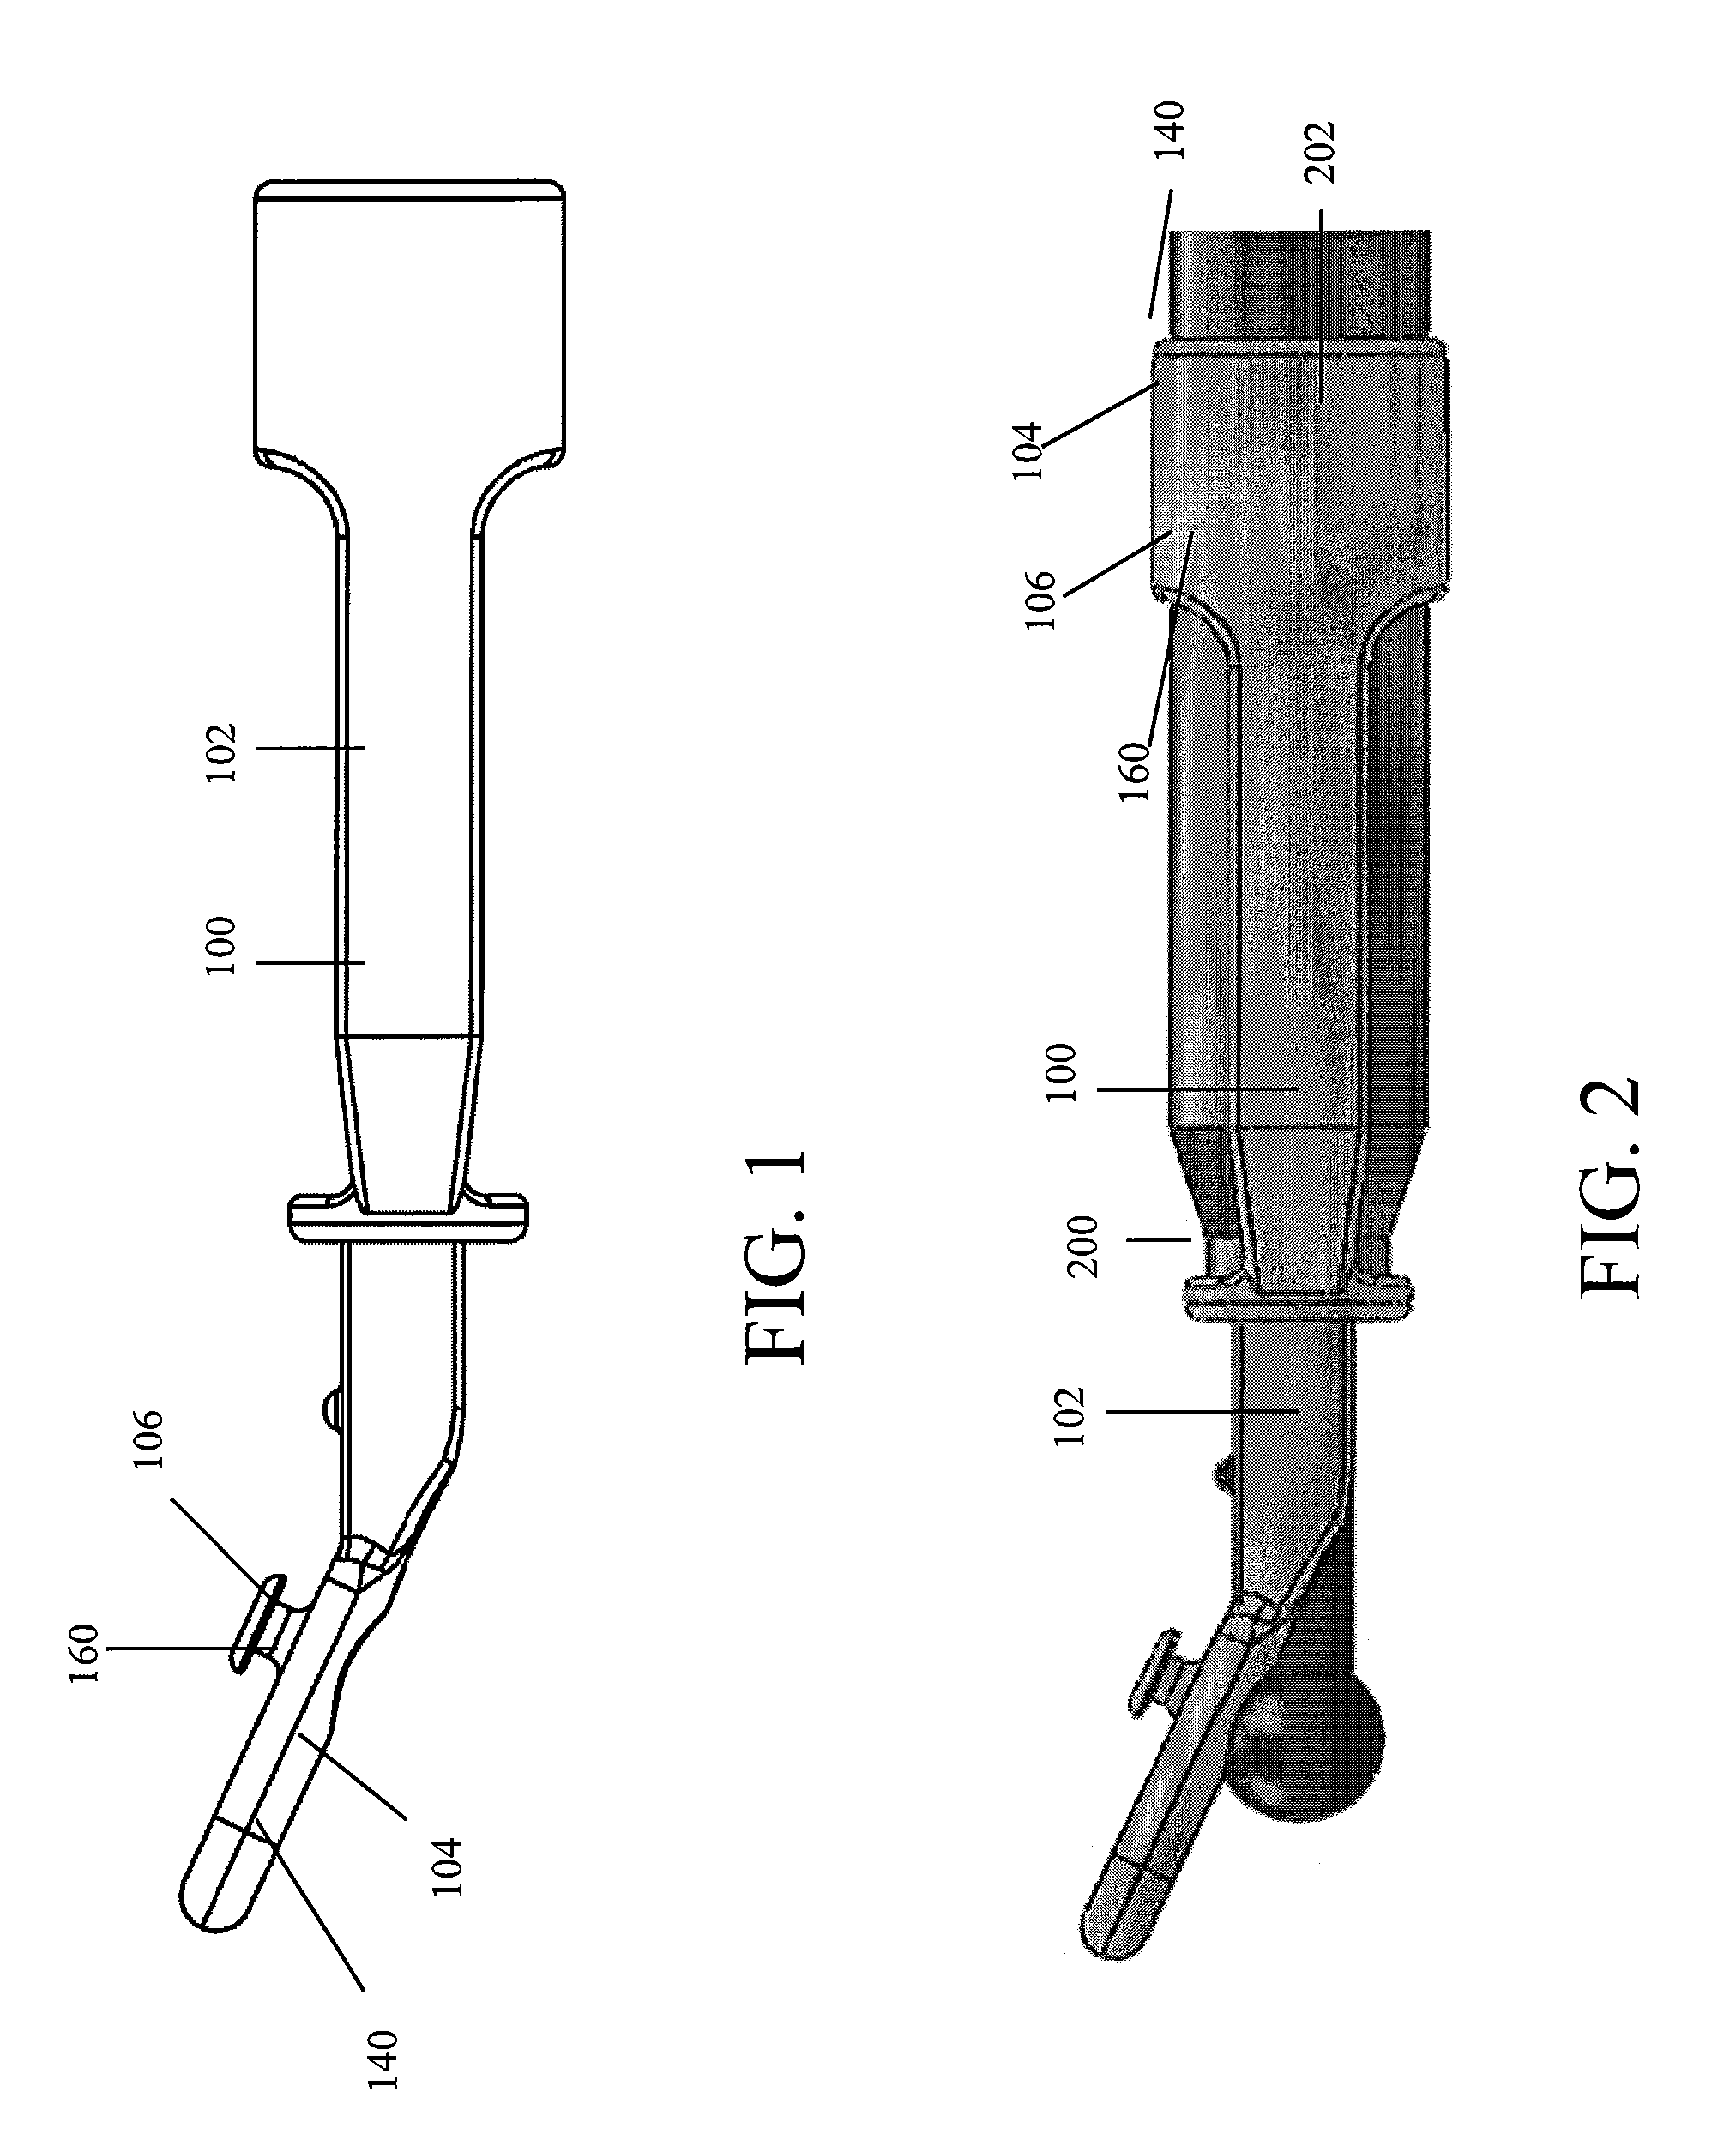 Bur guide attachment and method of use